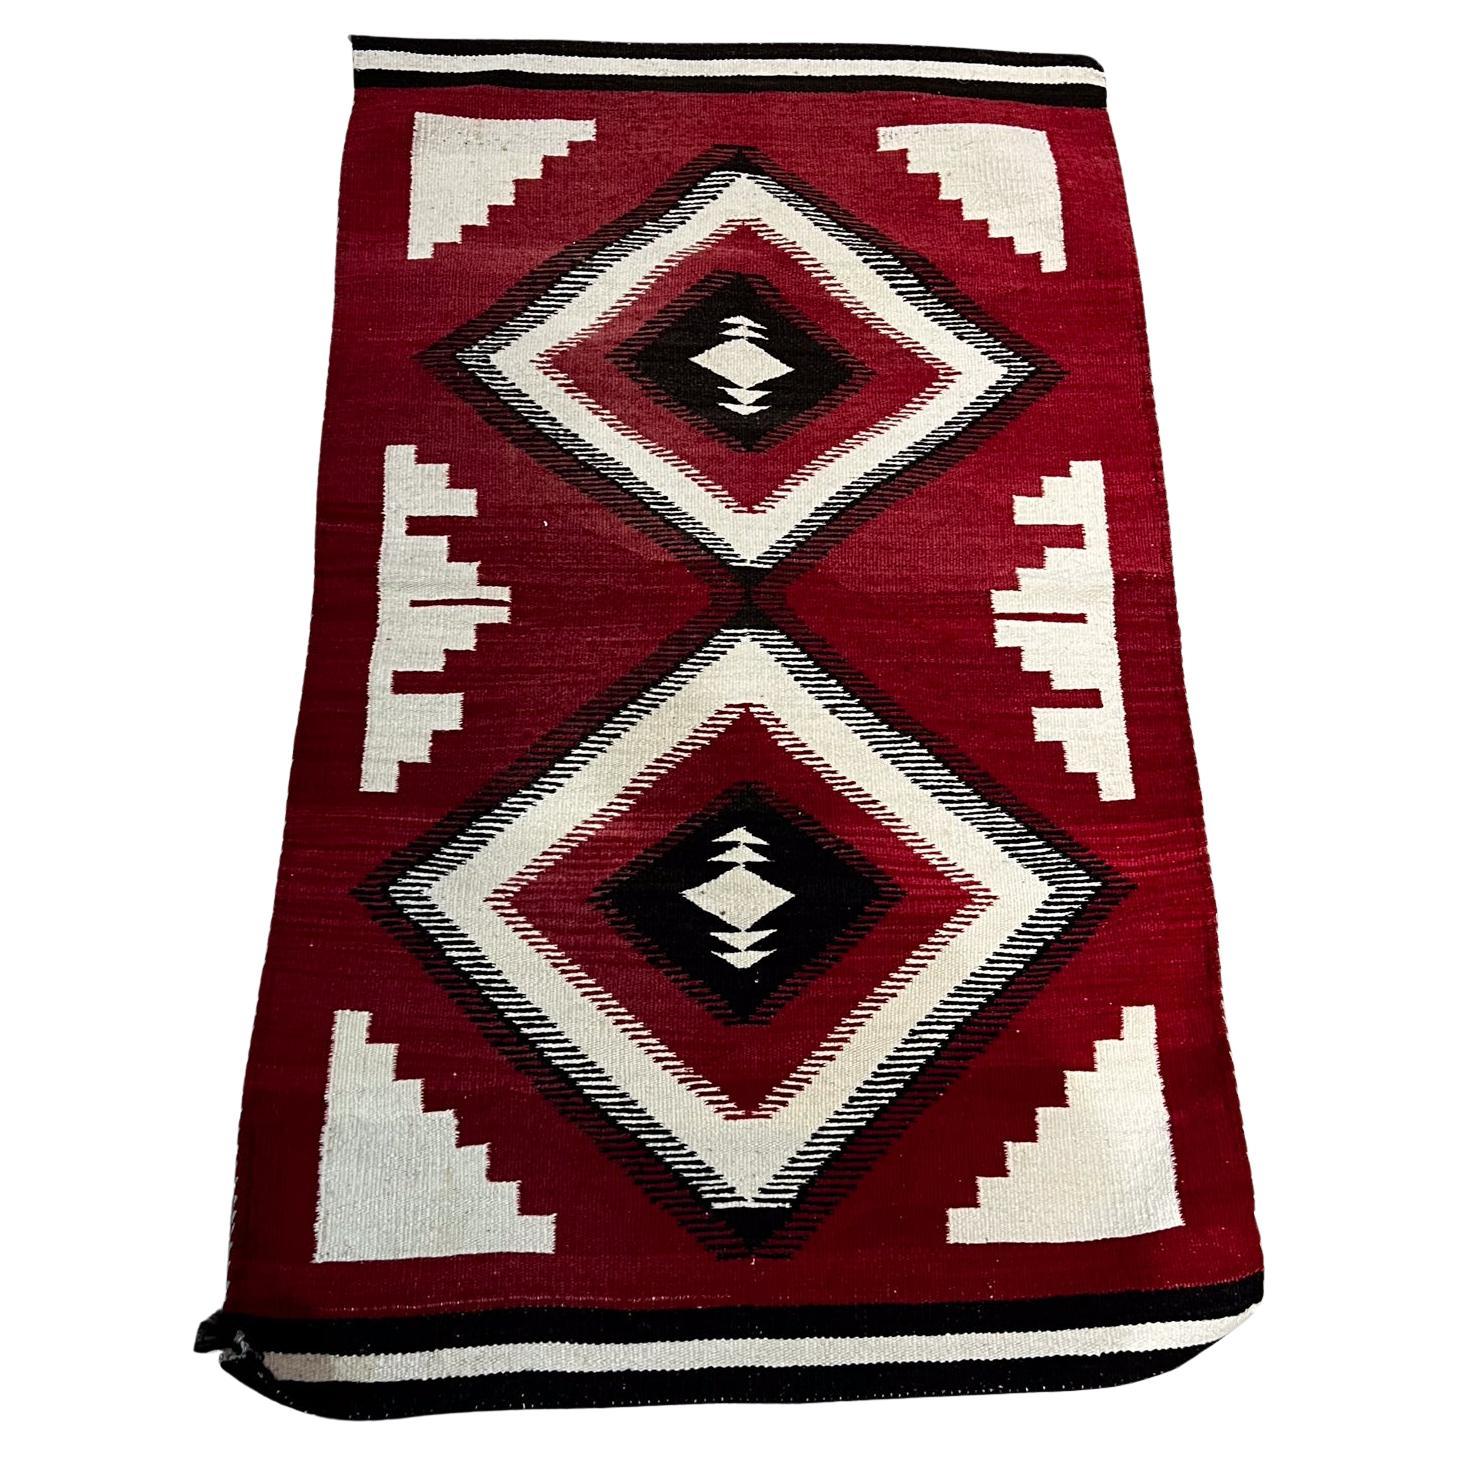 
Wall Decor Navajo Indian Style Large Vintage Rug Tapestry Wall Hanging
46.5L x 28 W 
Preowned vintage unrestored condition.
Review images please.